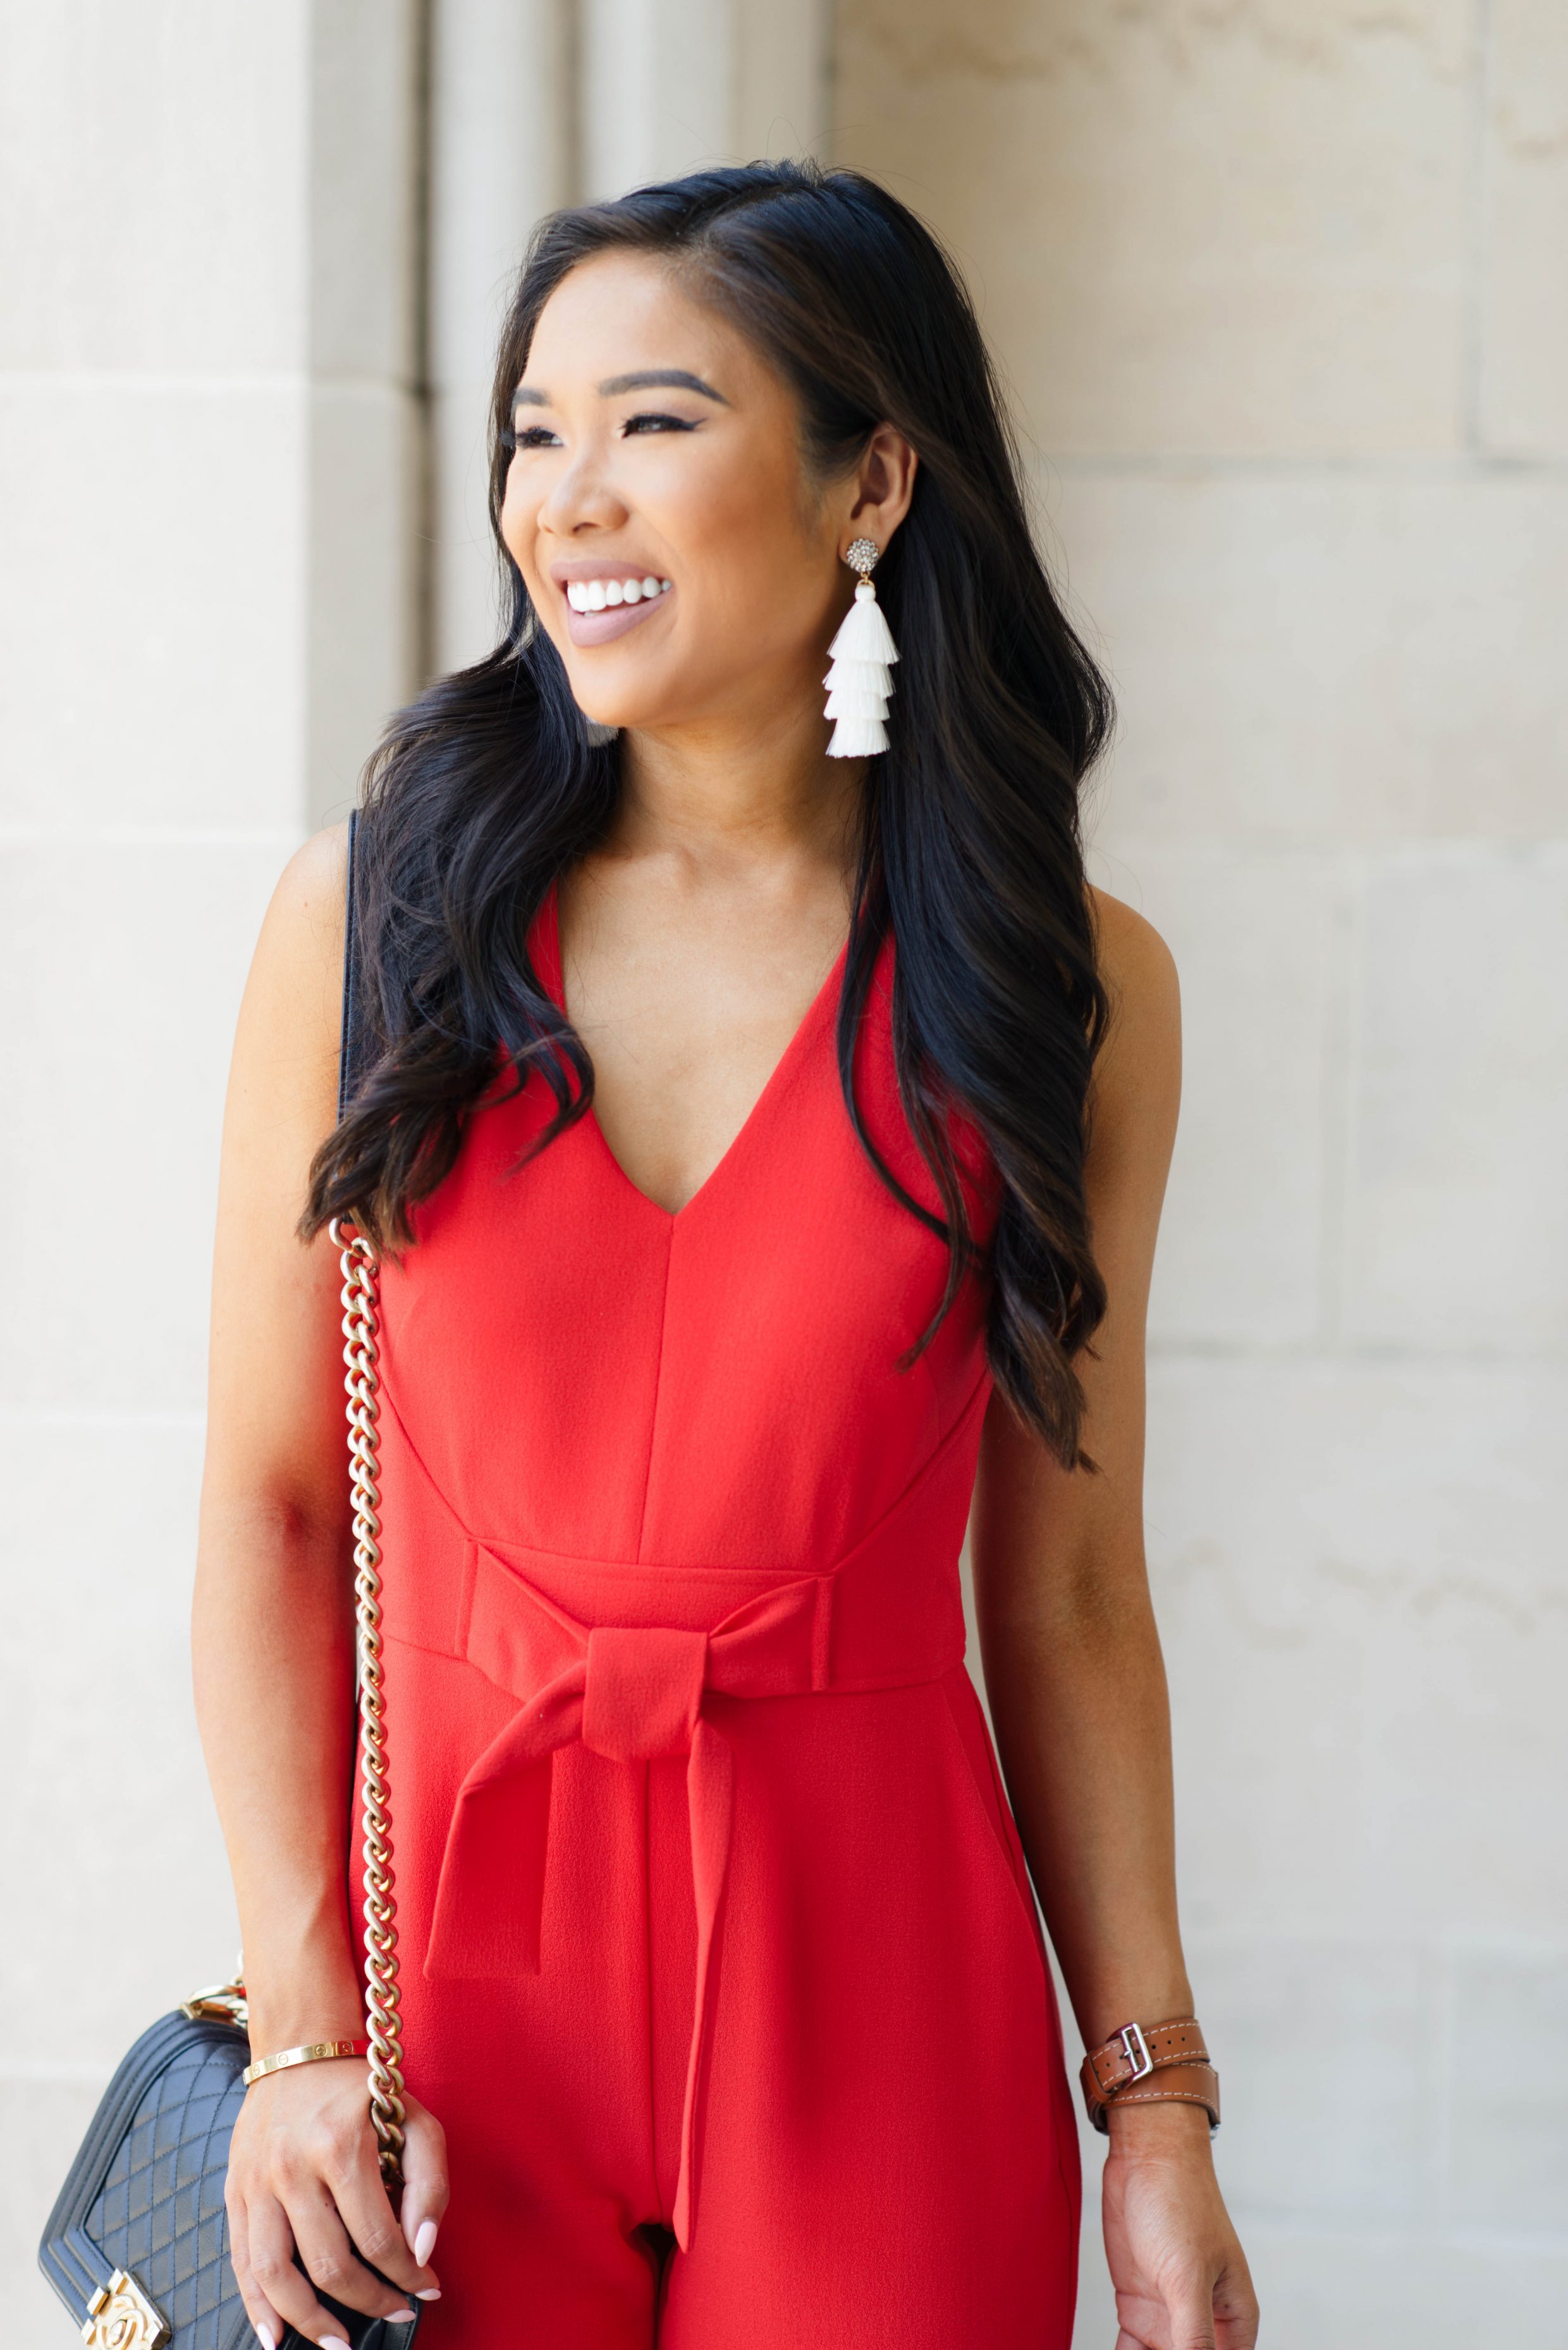 Blogger Hoang-Kim wears a red jumpsuit with pockets and Olive + Piper tassel earrings